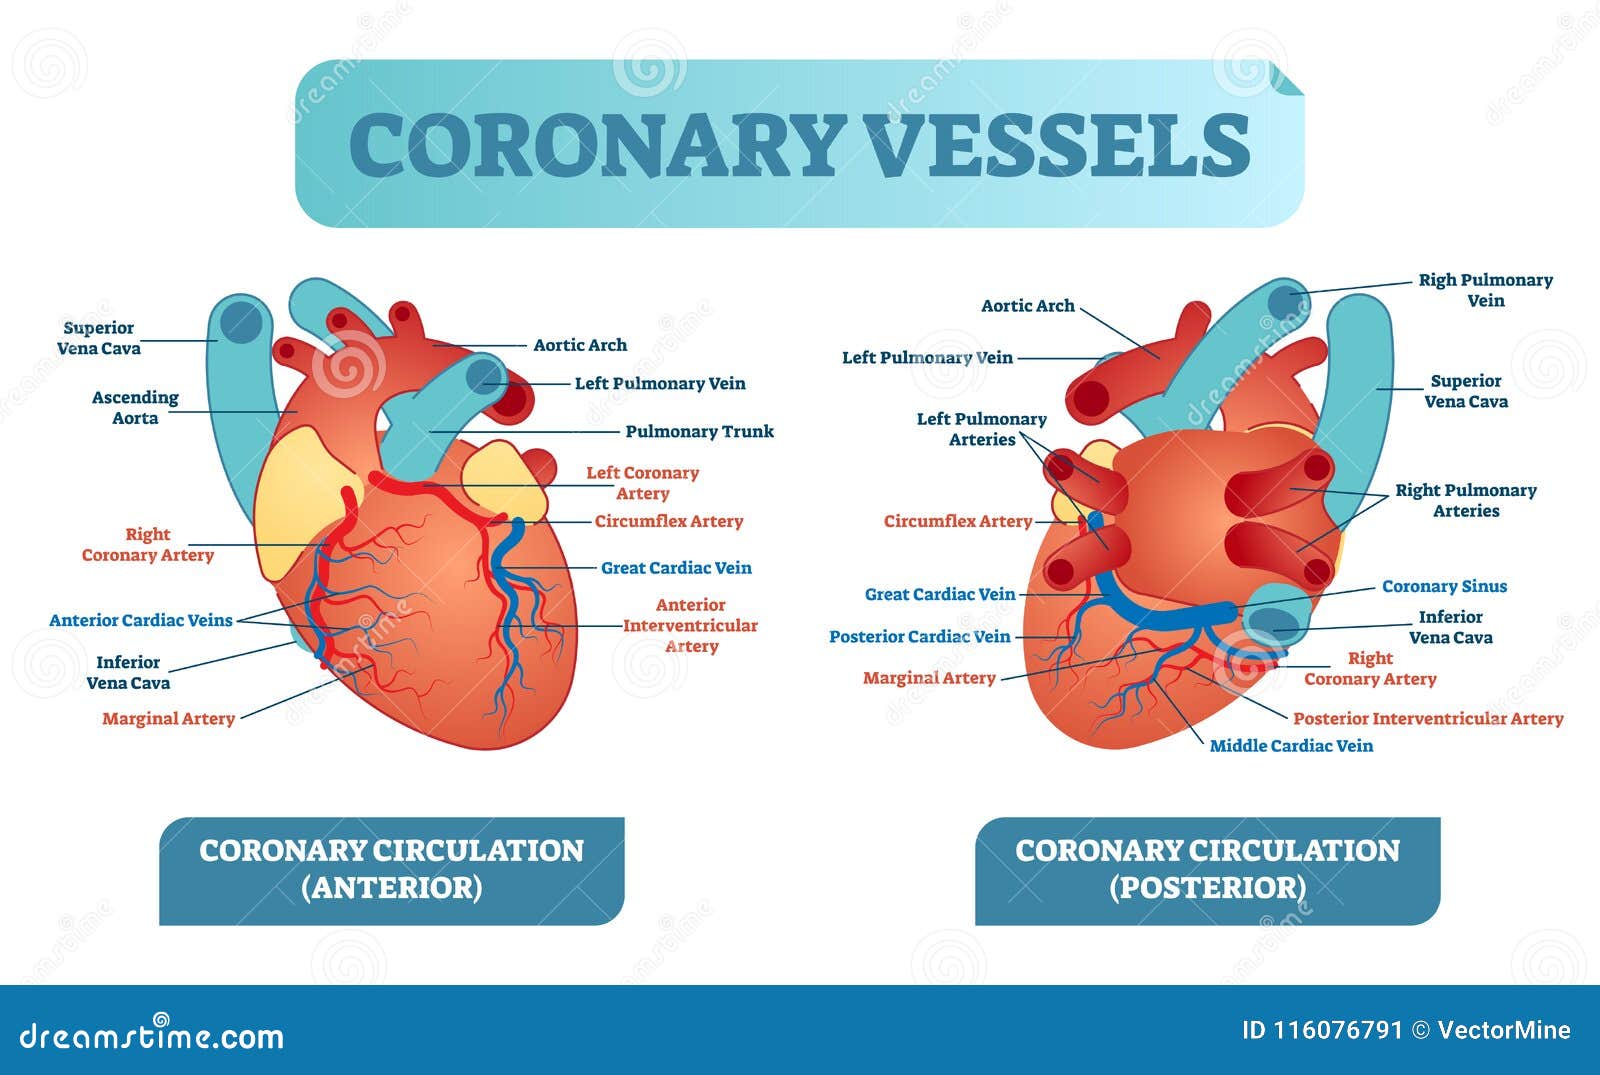 Coronary Vessels Anatomical Health Care Vector ...